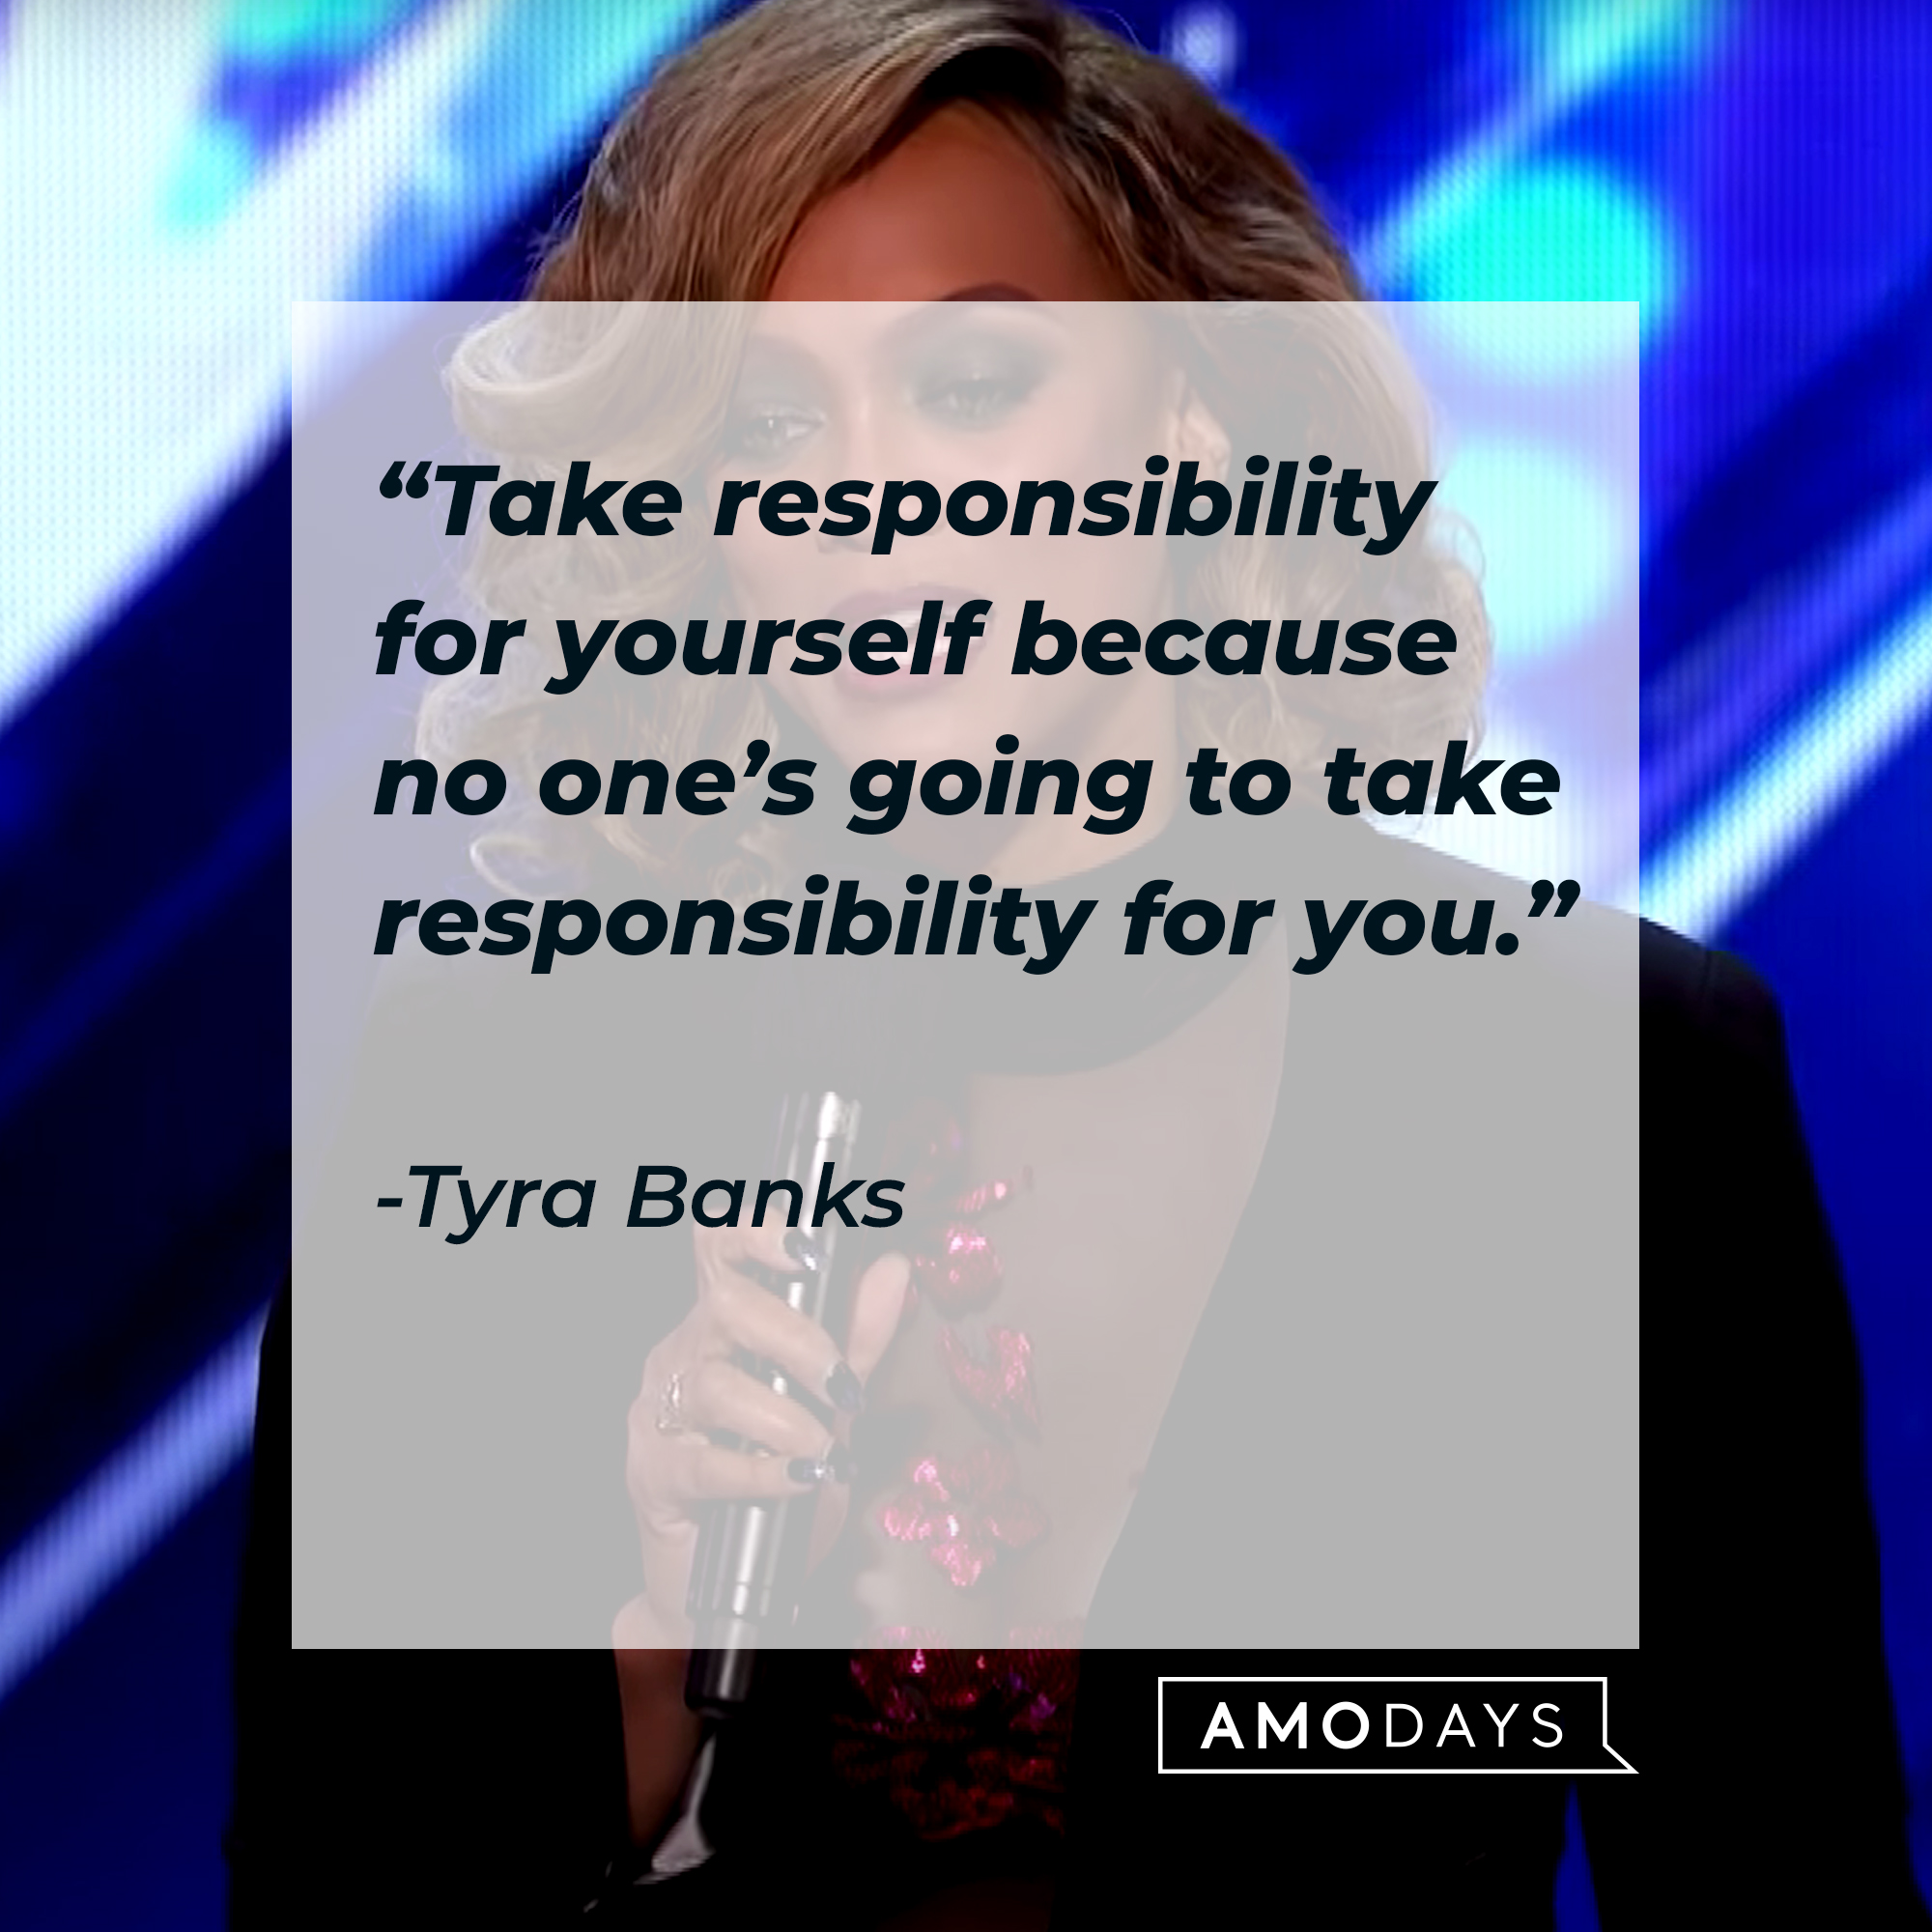 Tyra Banks' quote: "Take responsibility for yourself because no one's going to take responsibility for you." | Source: Getty Images